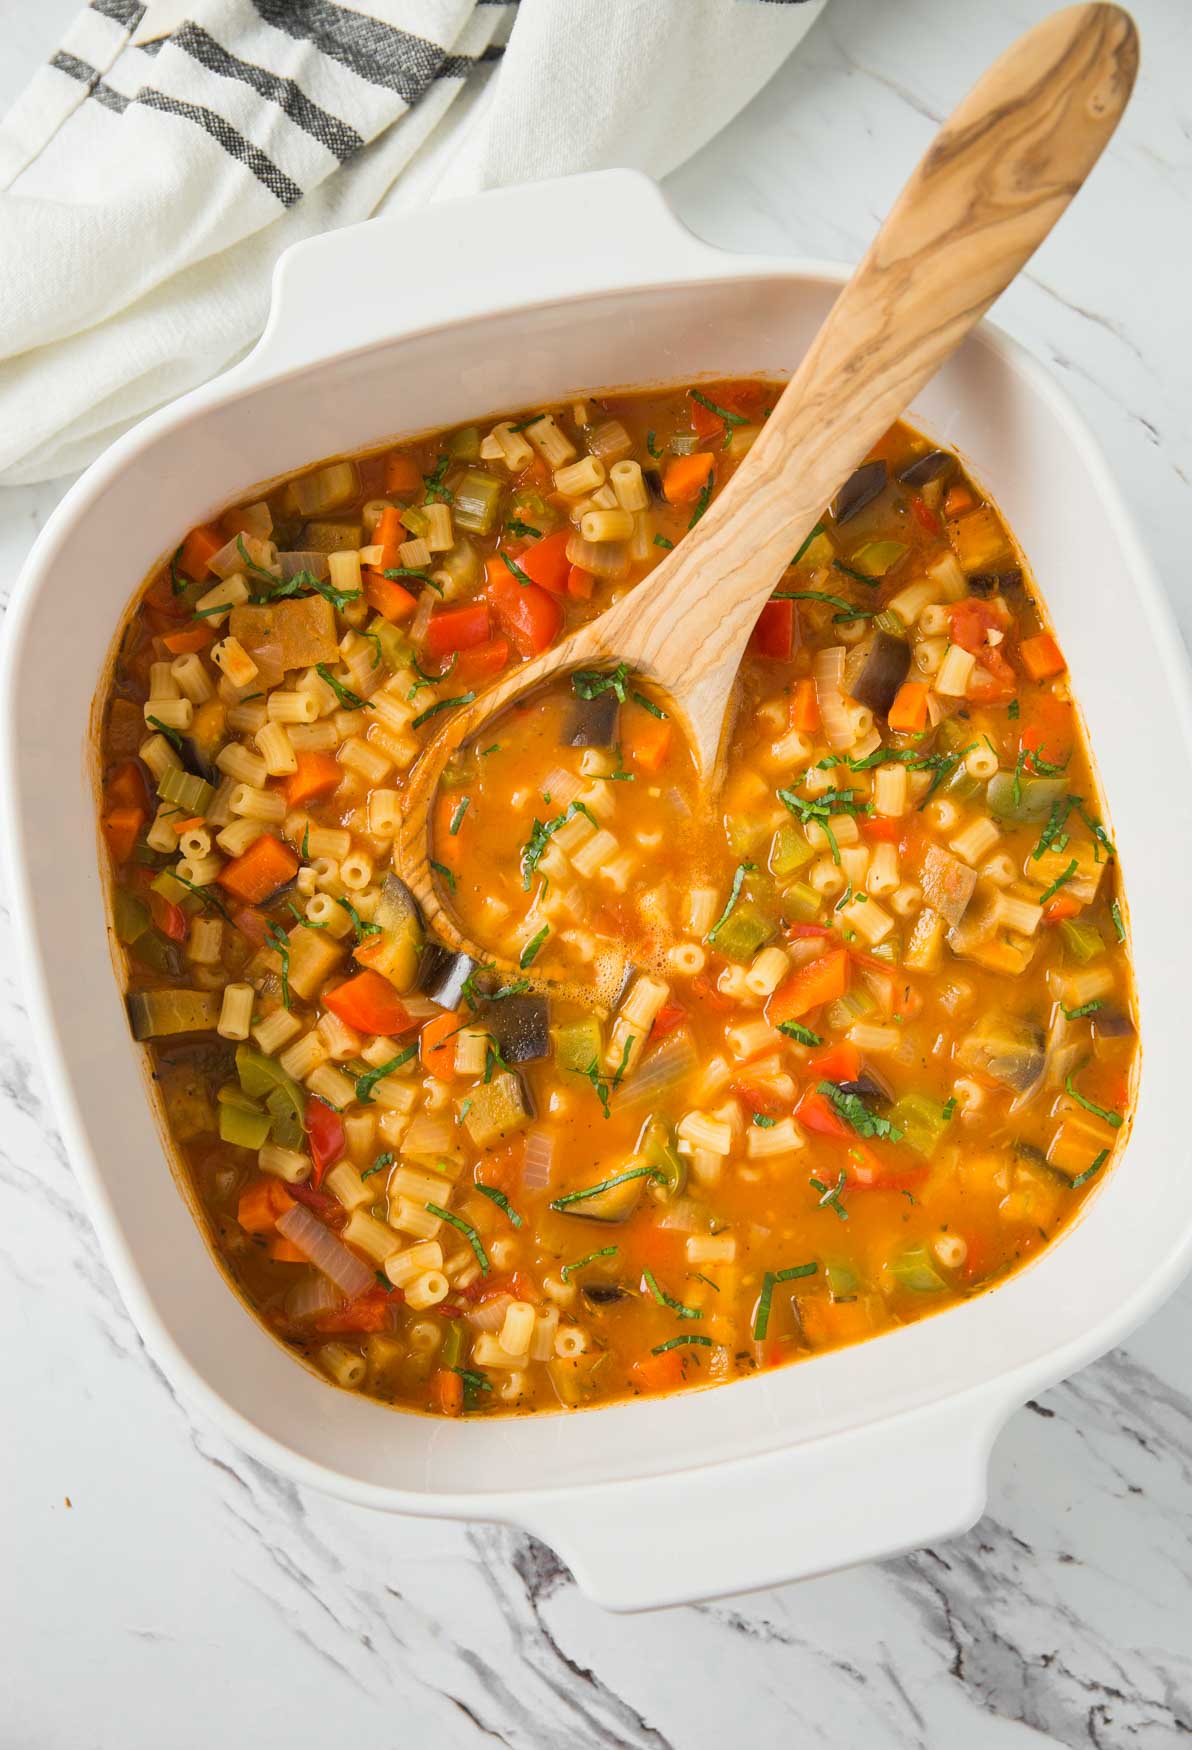 Fresh diced veggie & pasta cooked with garlic & tomato to prepare this delicious Italian healthy vegetable pasta soup. One pot wholesome bowl of soup for lunch/dinner. 